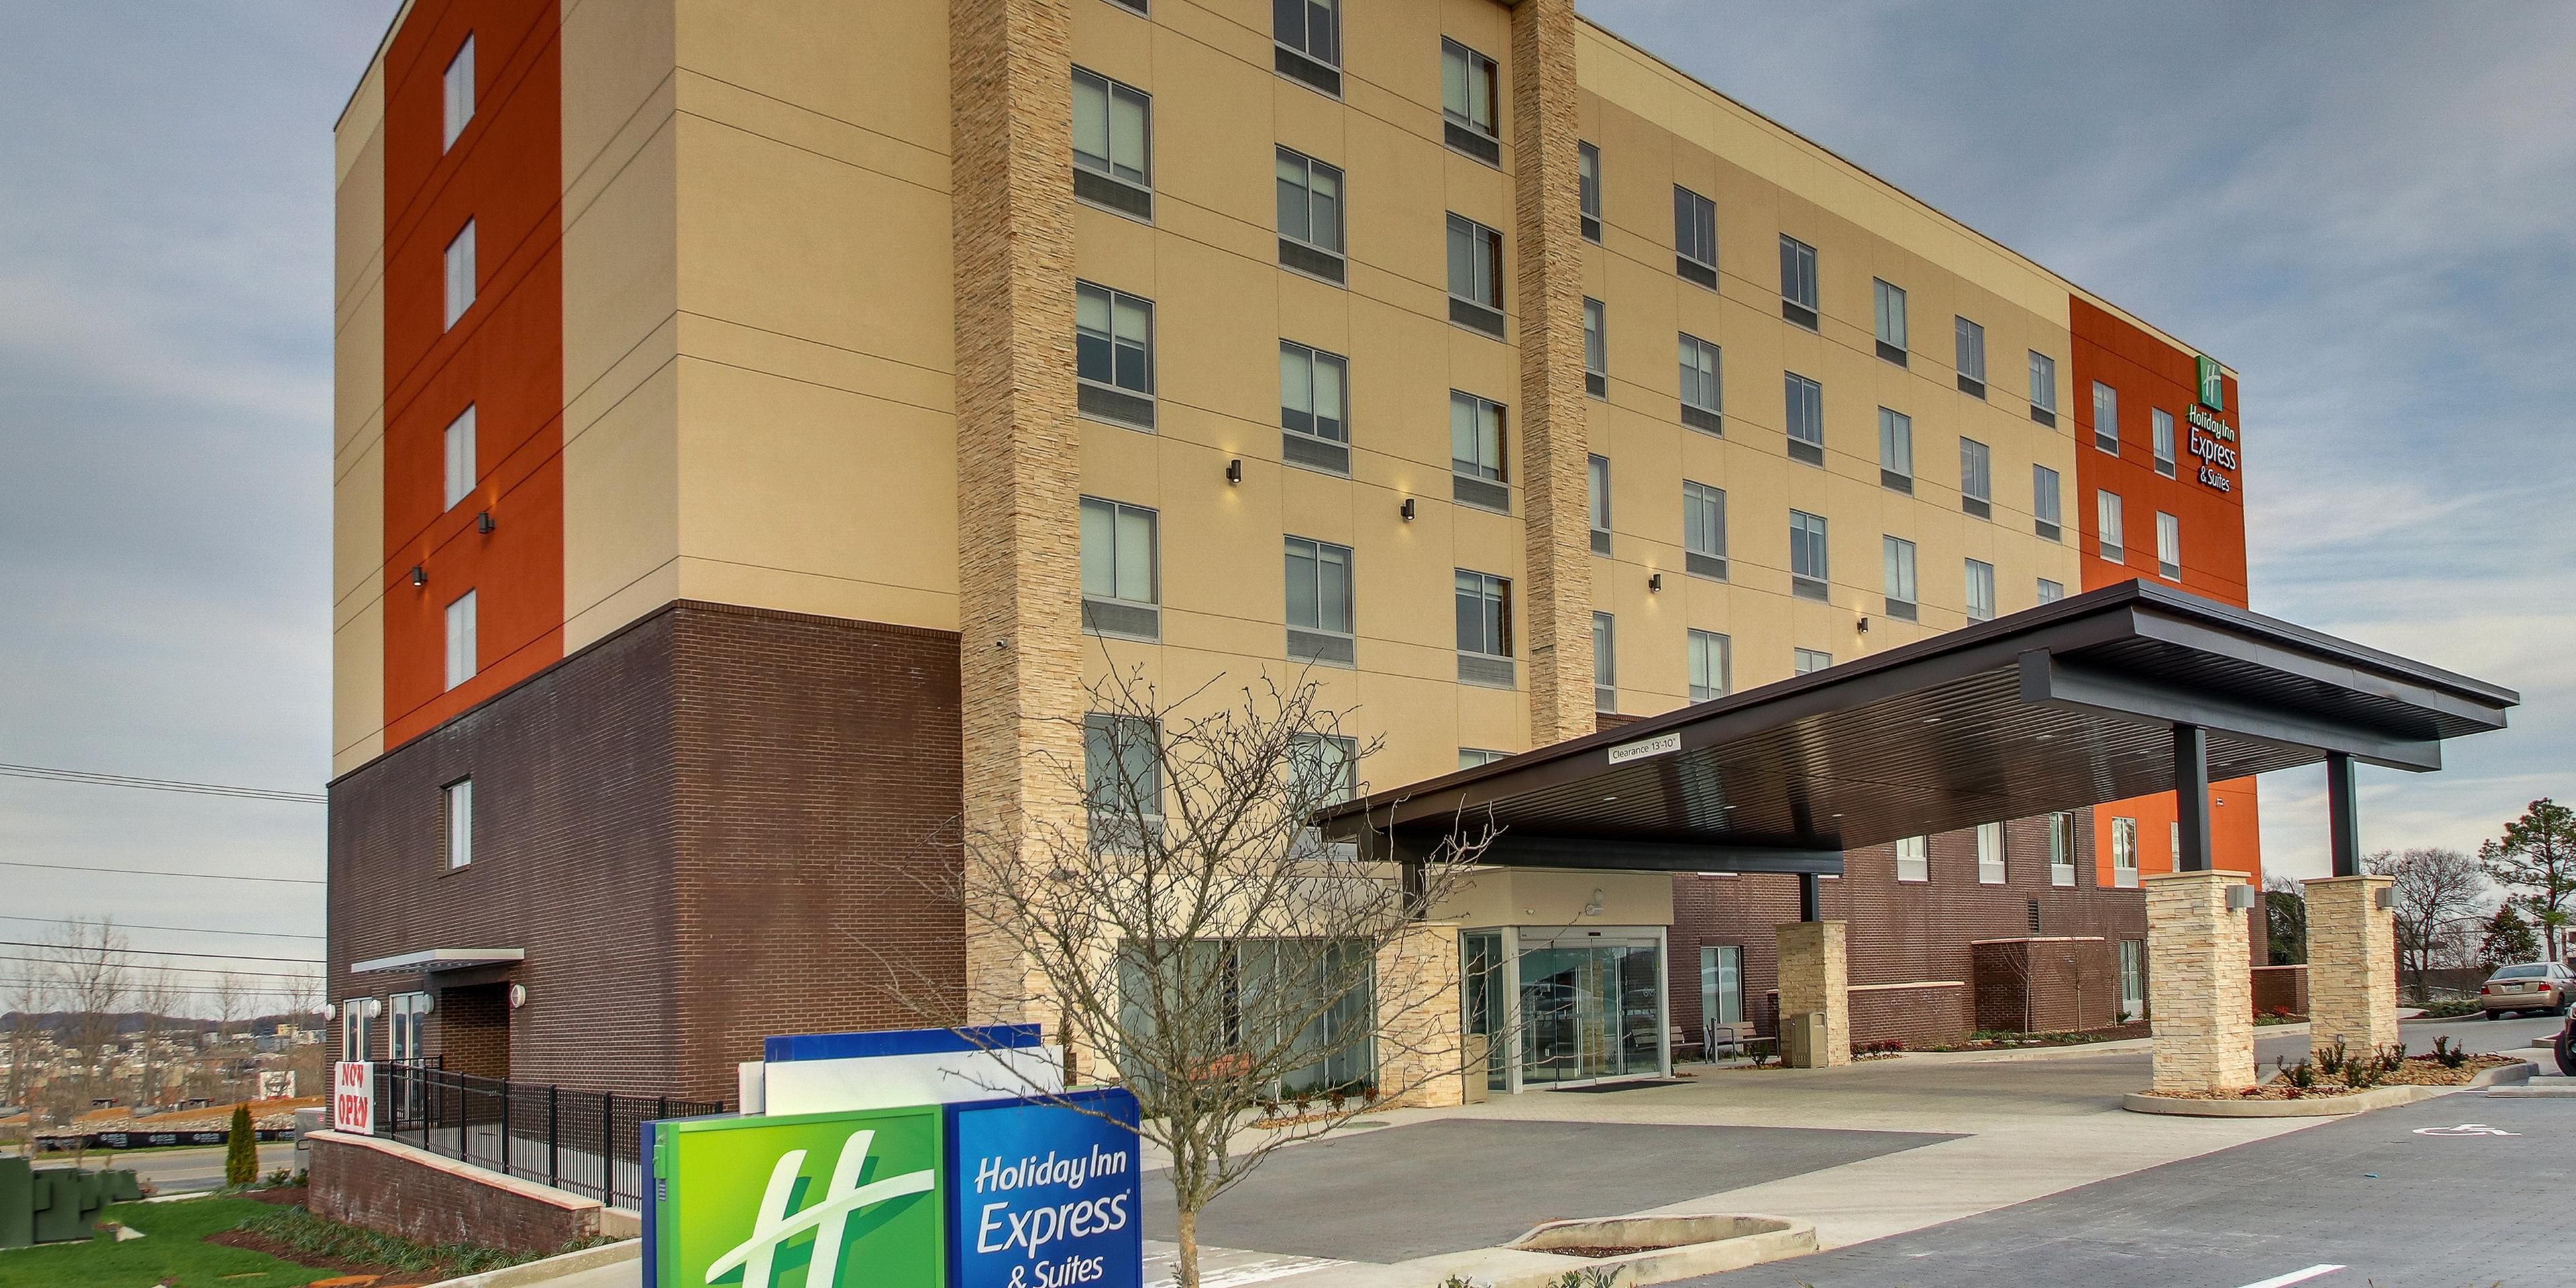 Holiday Inn Express And Suites Nashville 6360570301 2x1